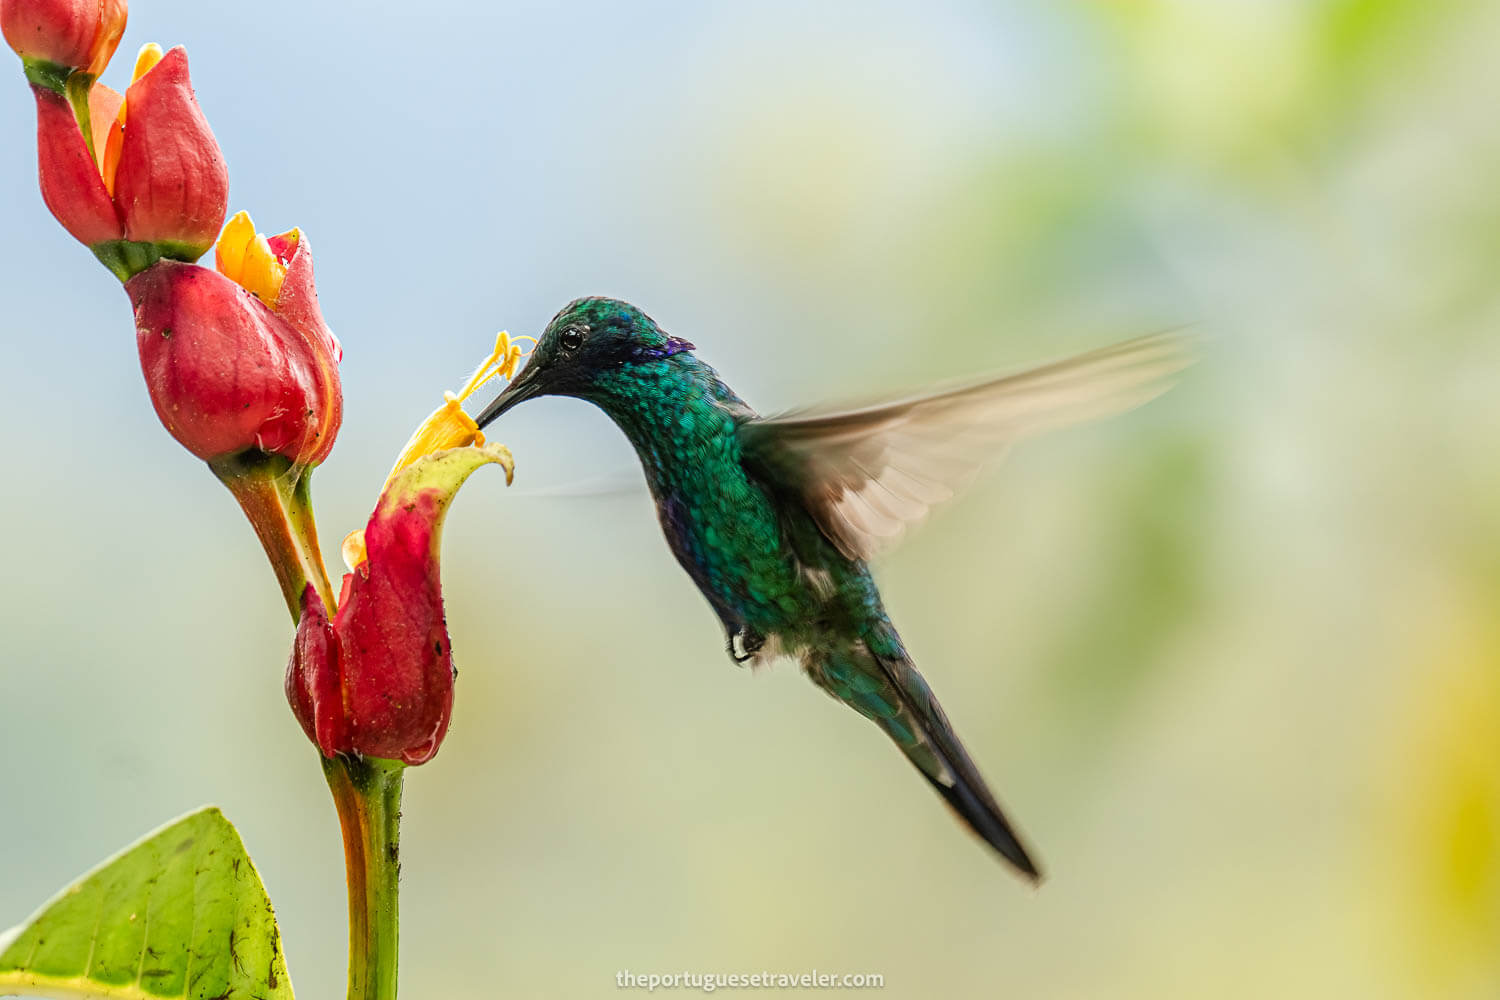 A Sparkling Violetear Hummingbird on the Birdwatching Tour in Mindo